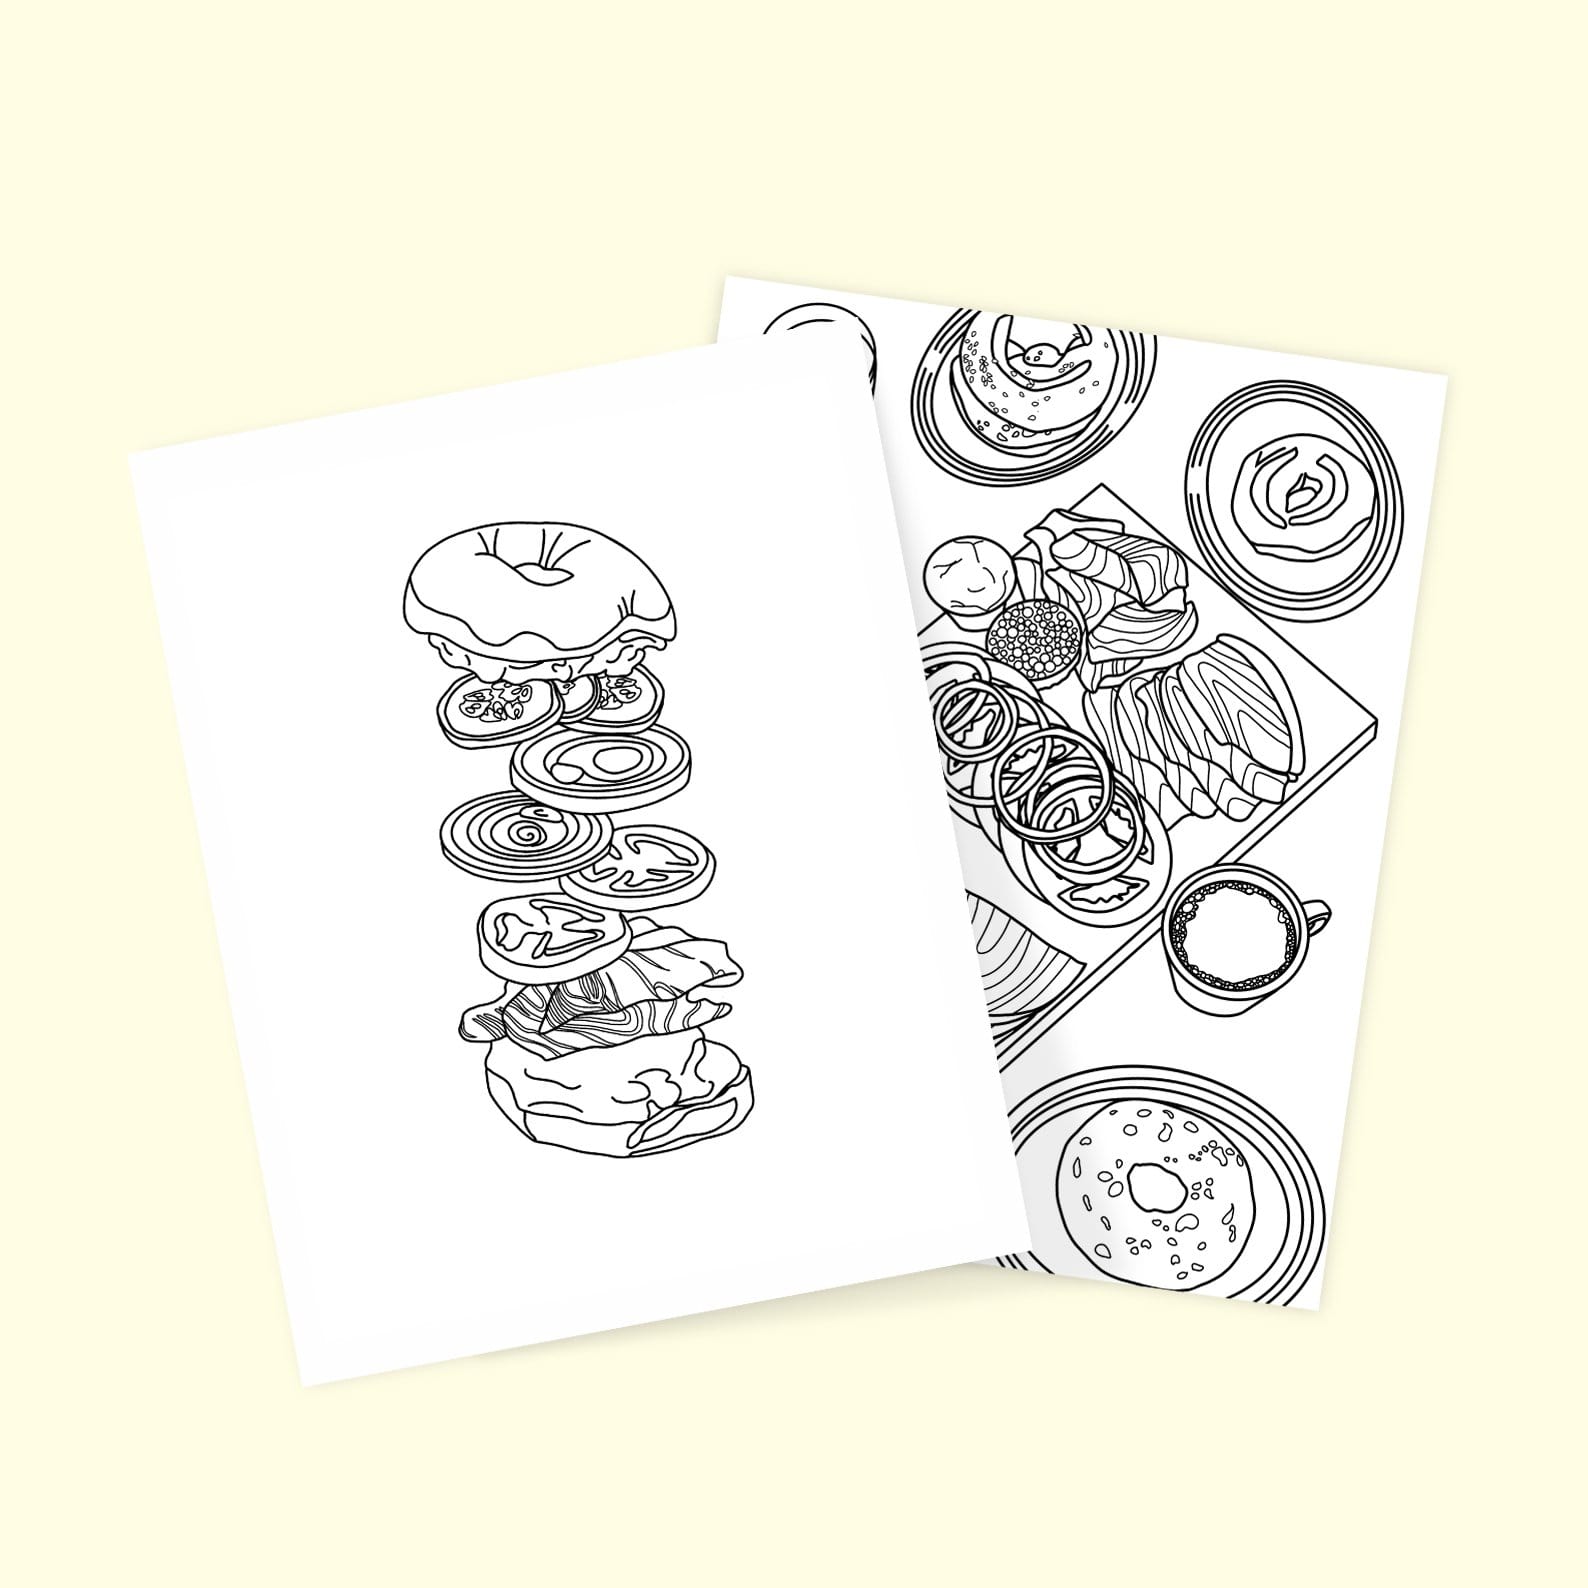 Drawn Goods Books I Love Bagels - A Coloring Book